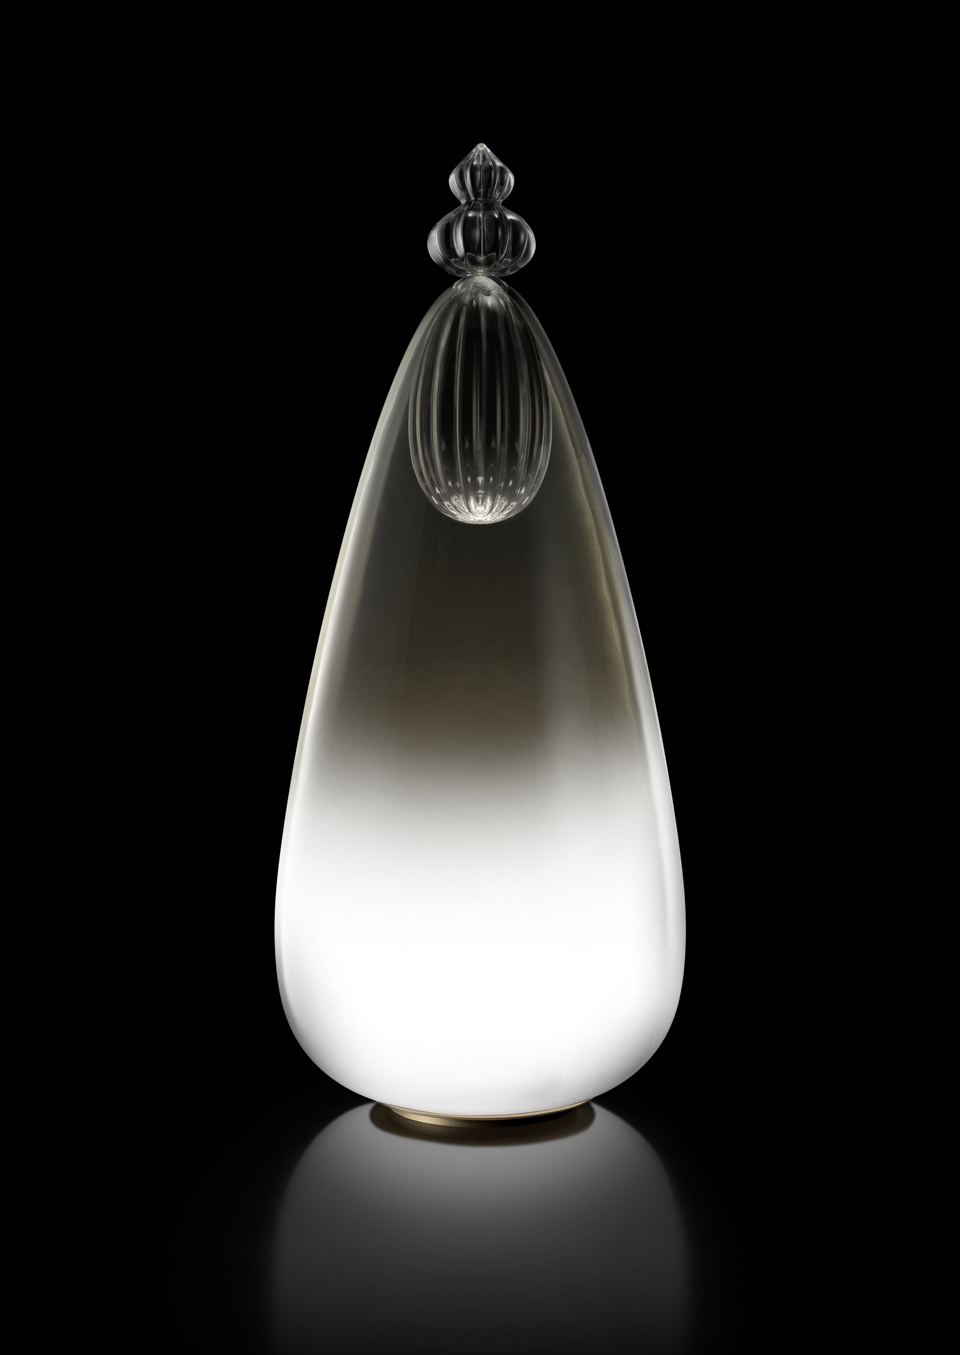 Padma table lamp in grey and black Murano crystal. Barovier&Toso. 